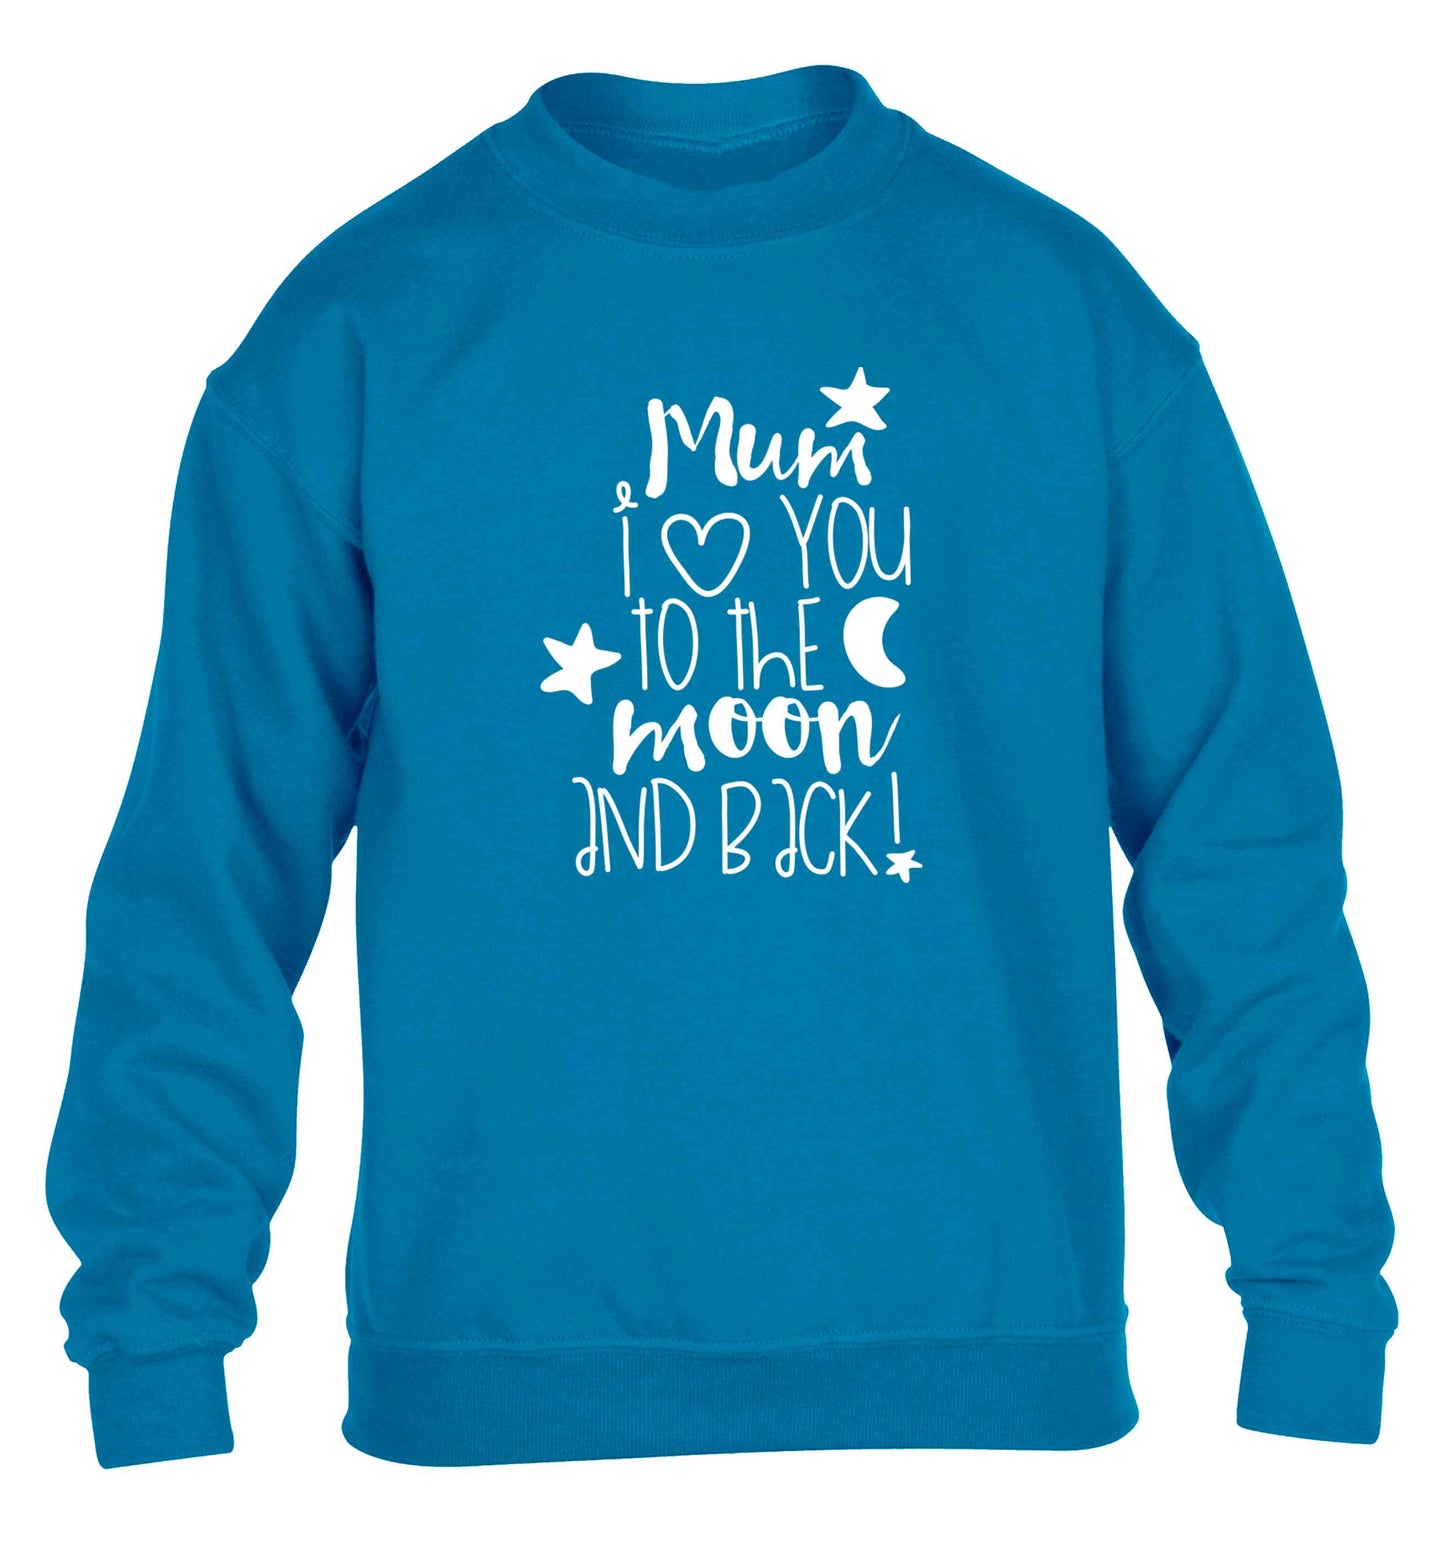 Mum I love you to the moon and back children's blue sweater 12-13 Years